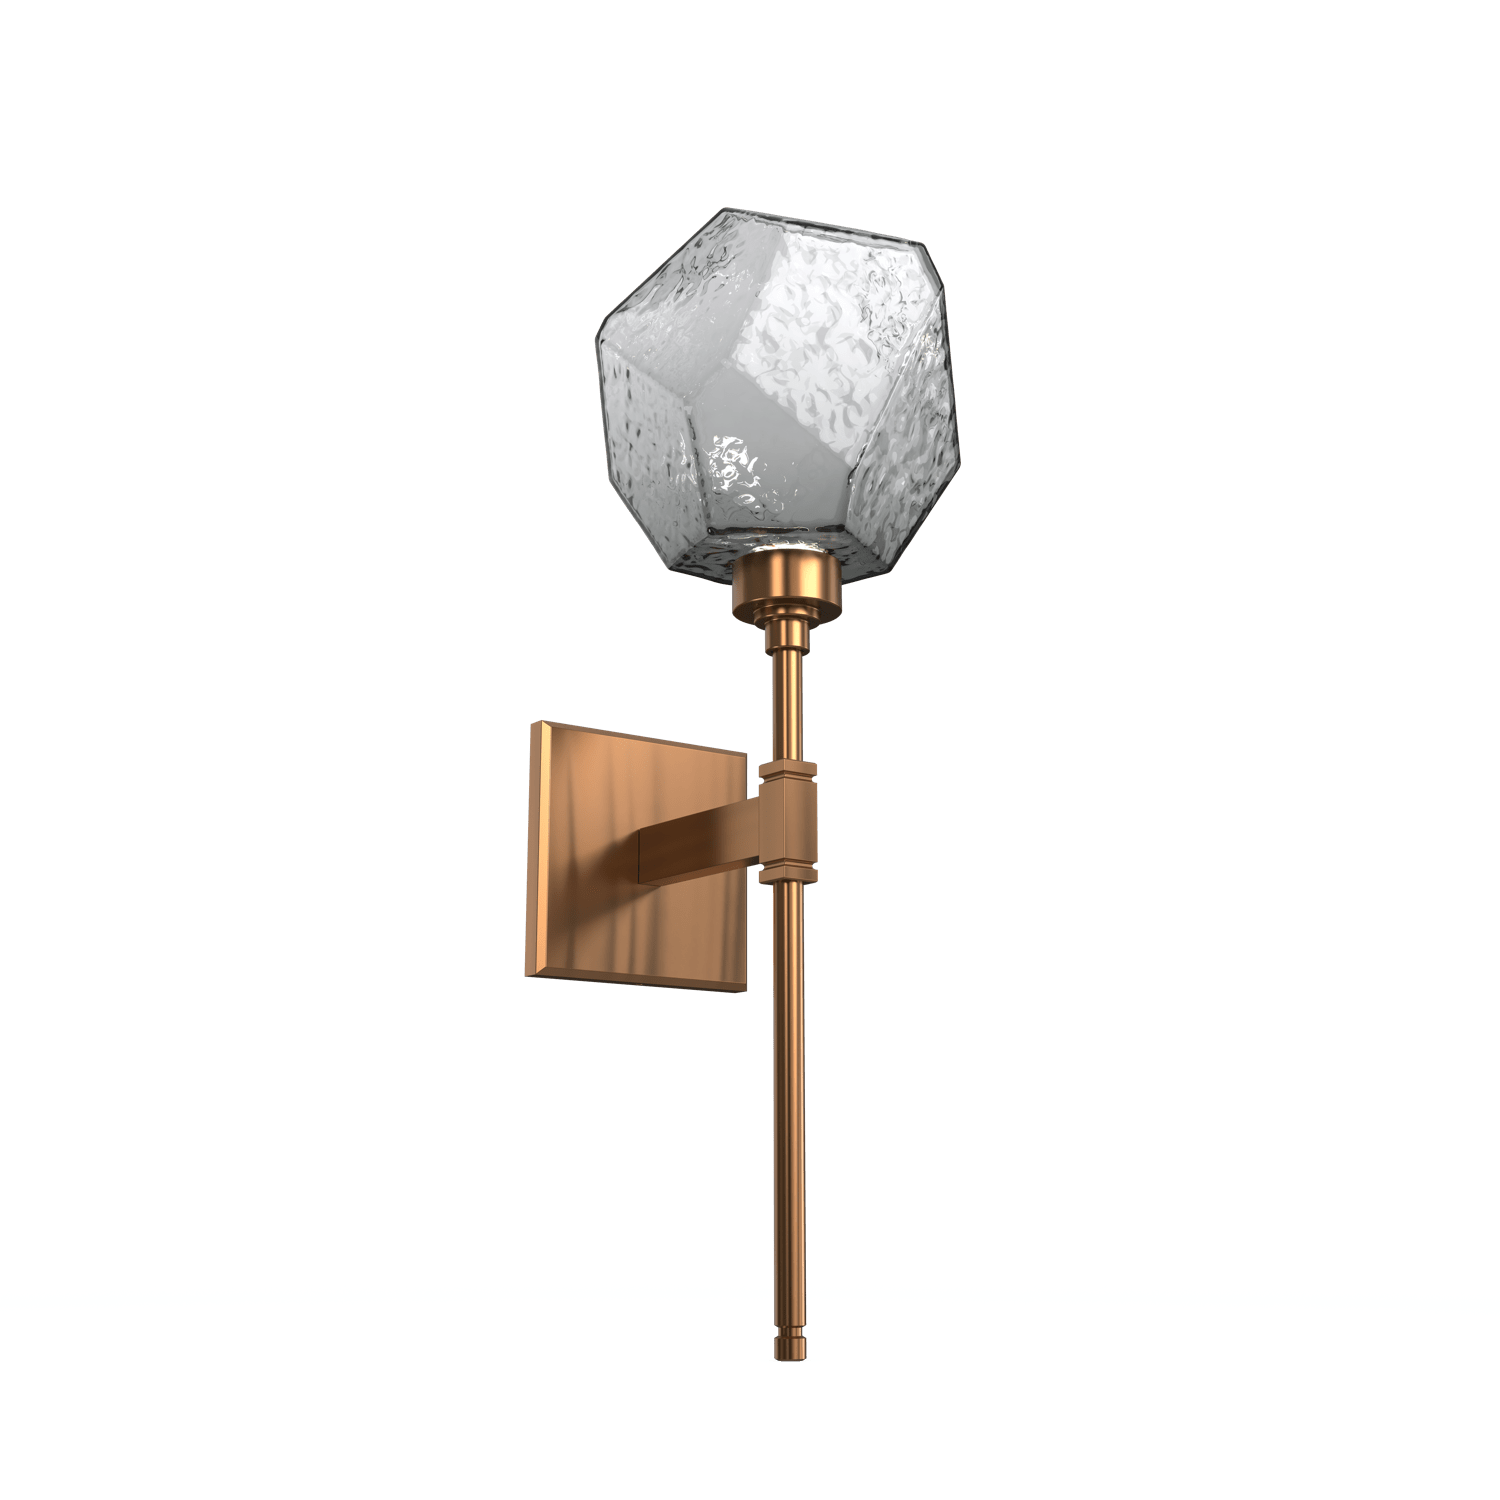 IDB0039-08-RB-S-Hammerton-Studio-Gem-belvedere-wall-sconce-with-oil-rubbed-bronze-finish-and-smoke-blown-glass-shades-and-LED-lamping